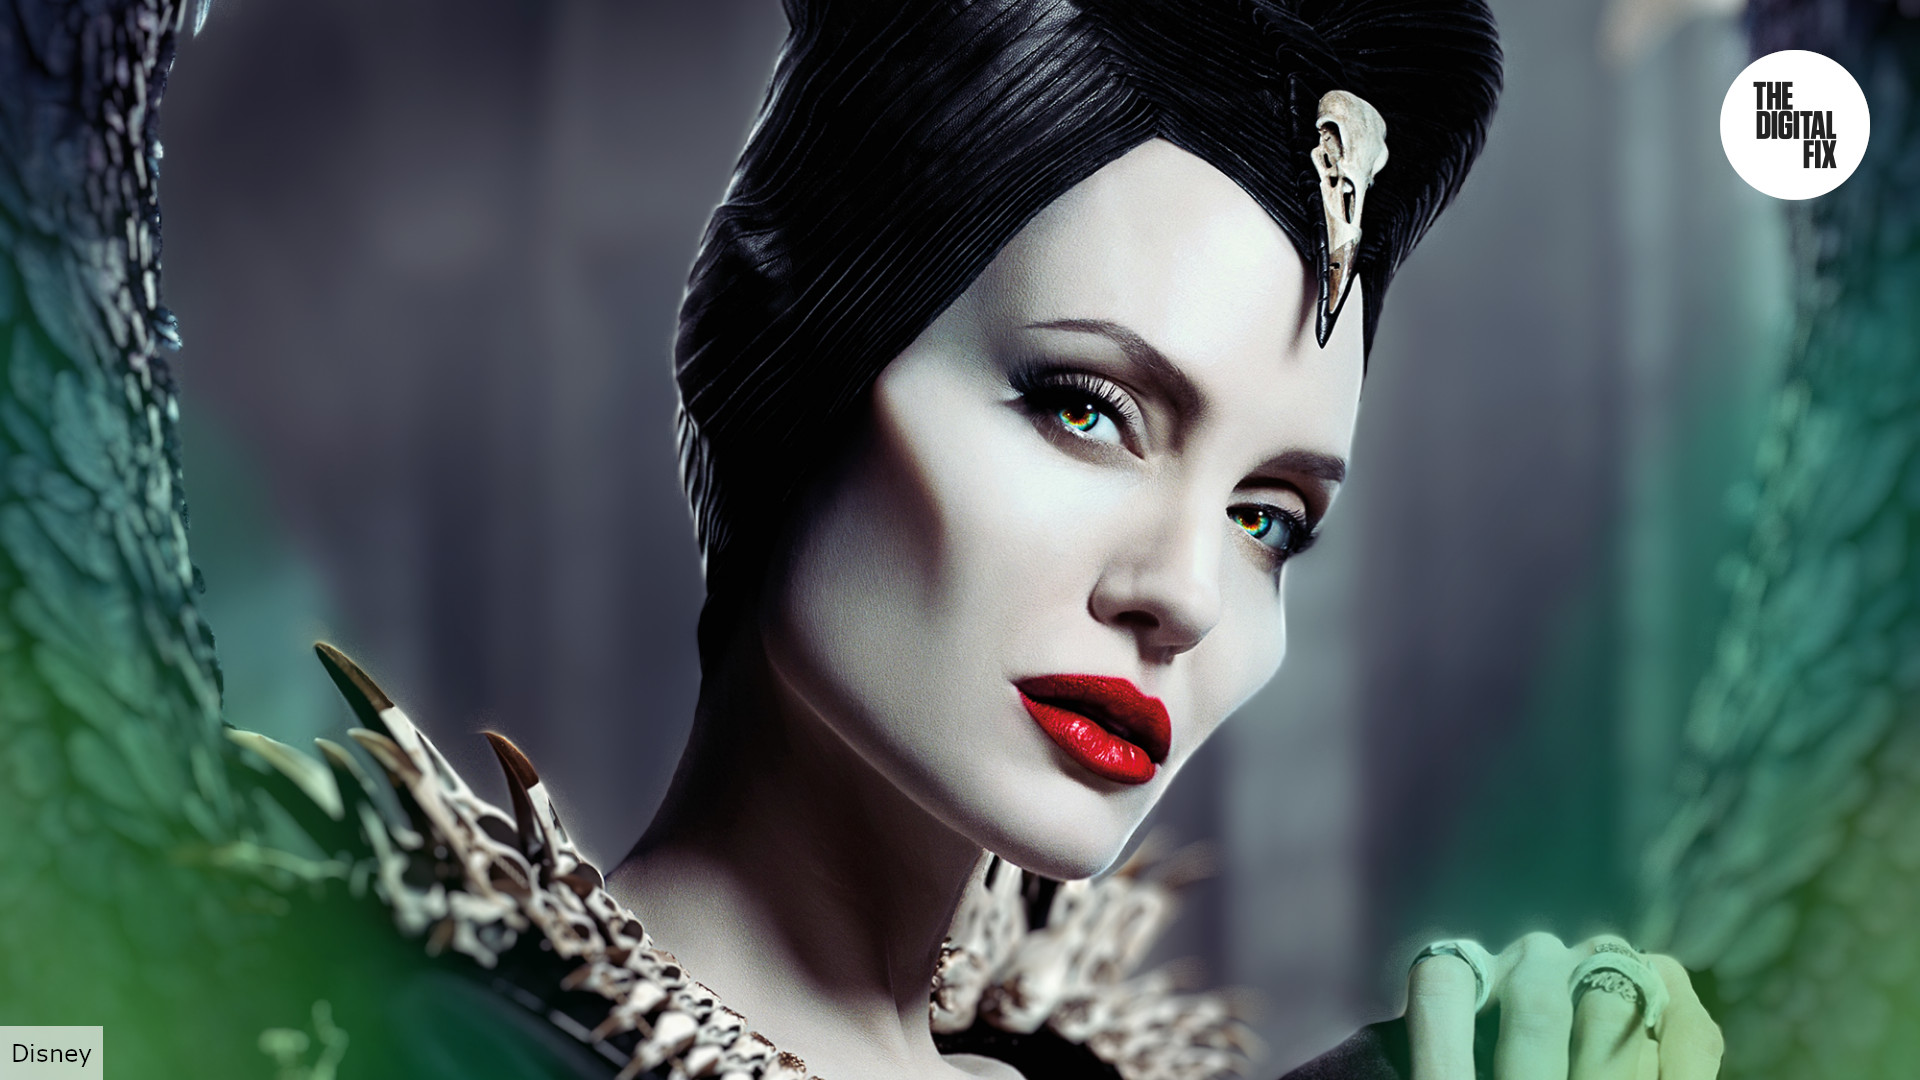 Maleficent 3 release date speculation, cast, plot, and more news